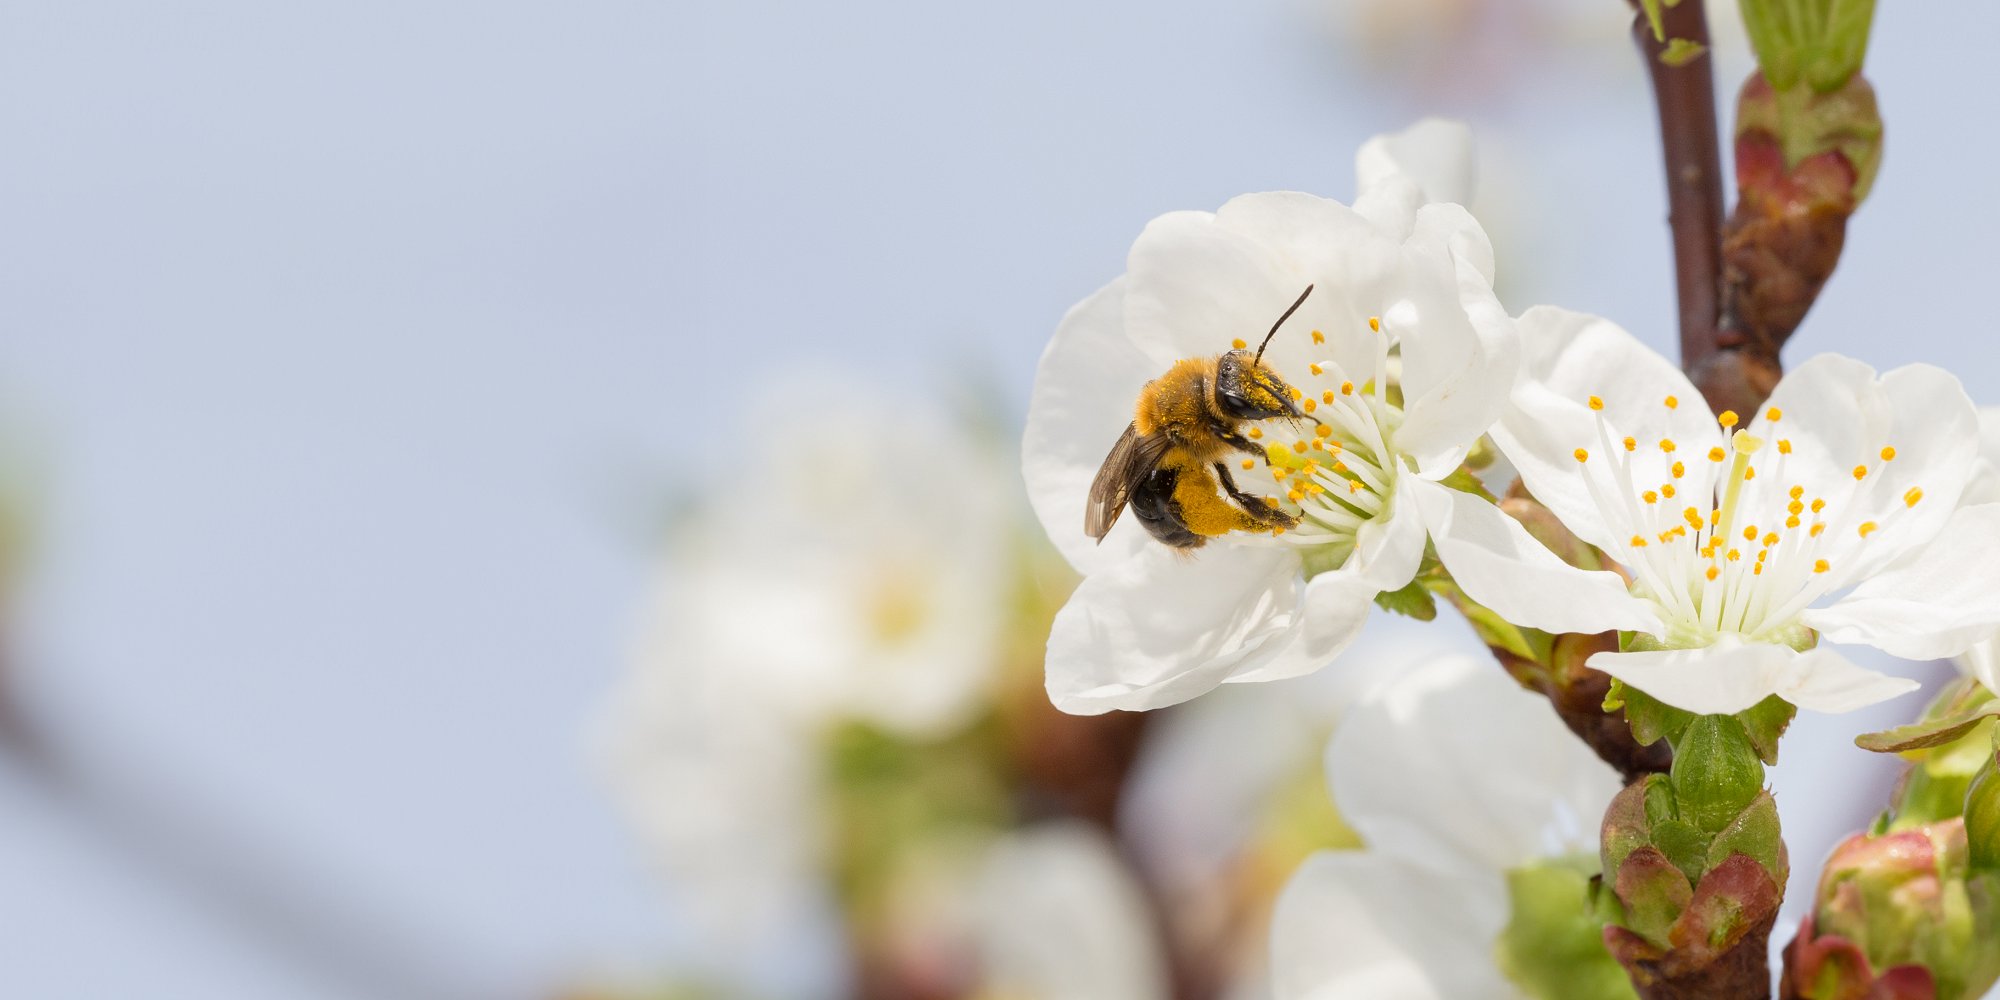 Wild Bee on apple blossom (Photo by Chris Kitchen)